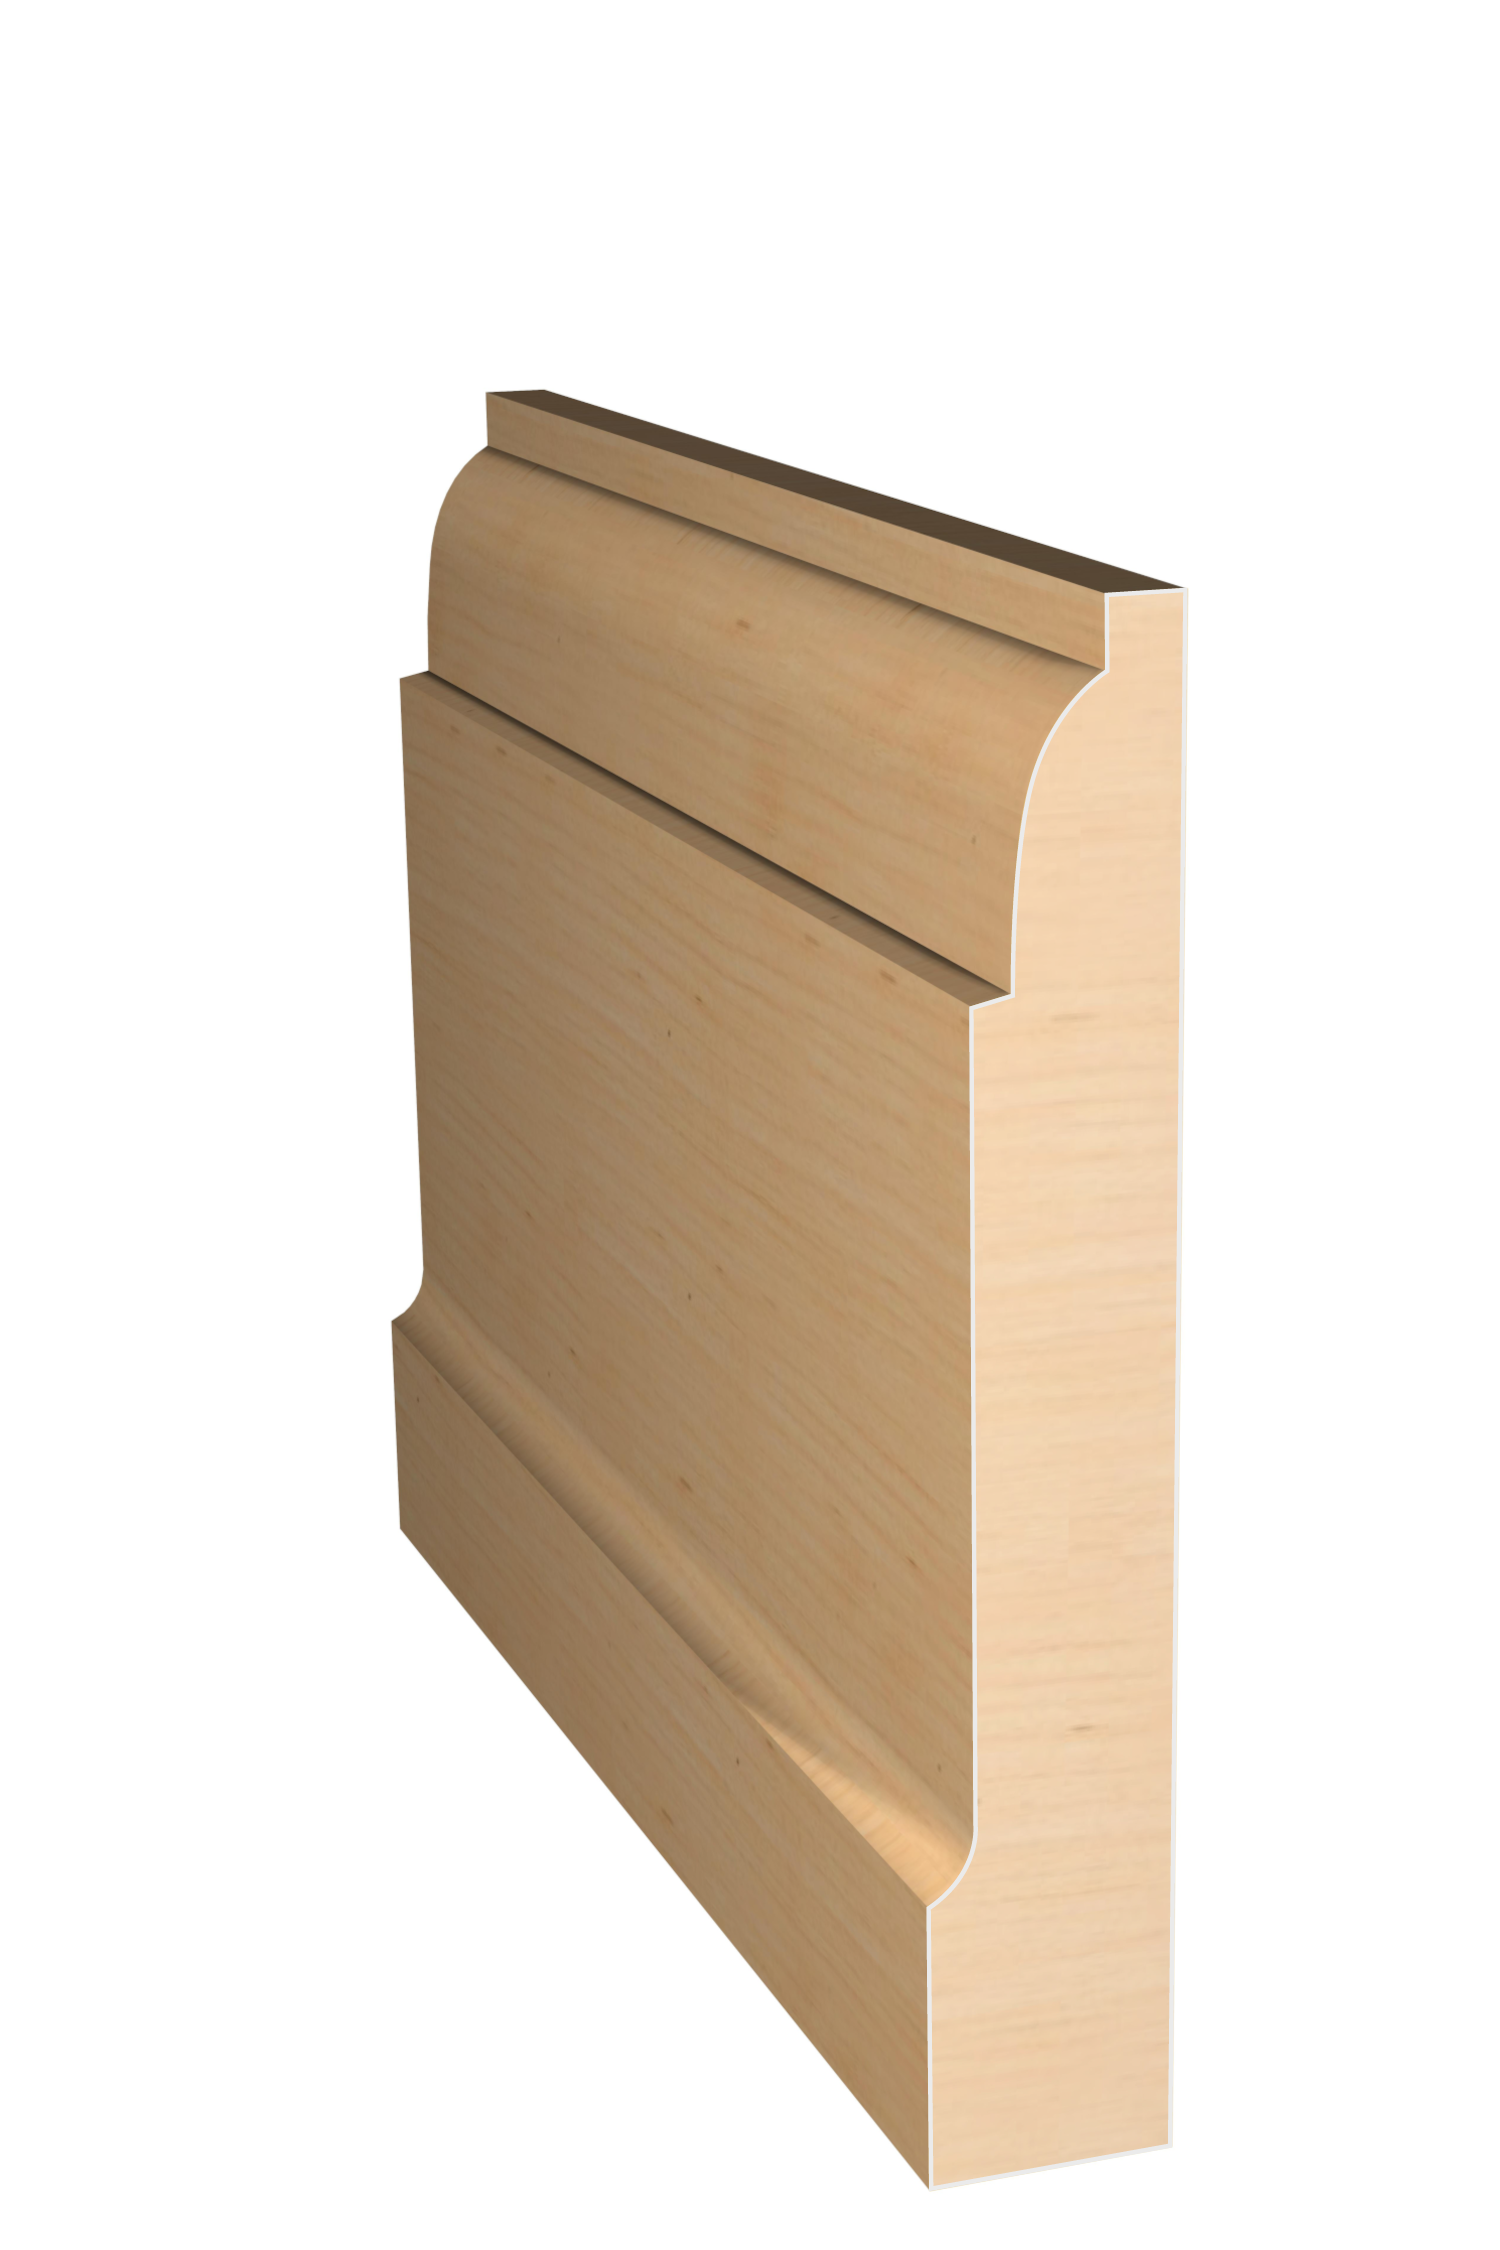 Three dimensional rendering of custom base wood molding BAPL41220 made by Public Lumber Company in Detroit.